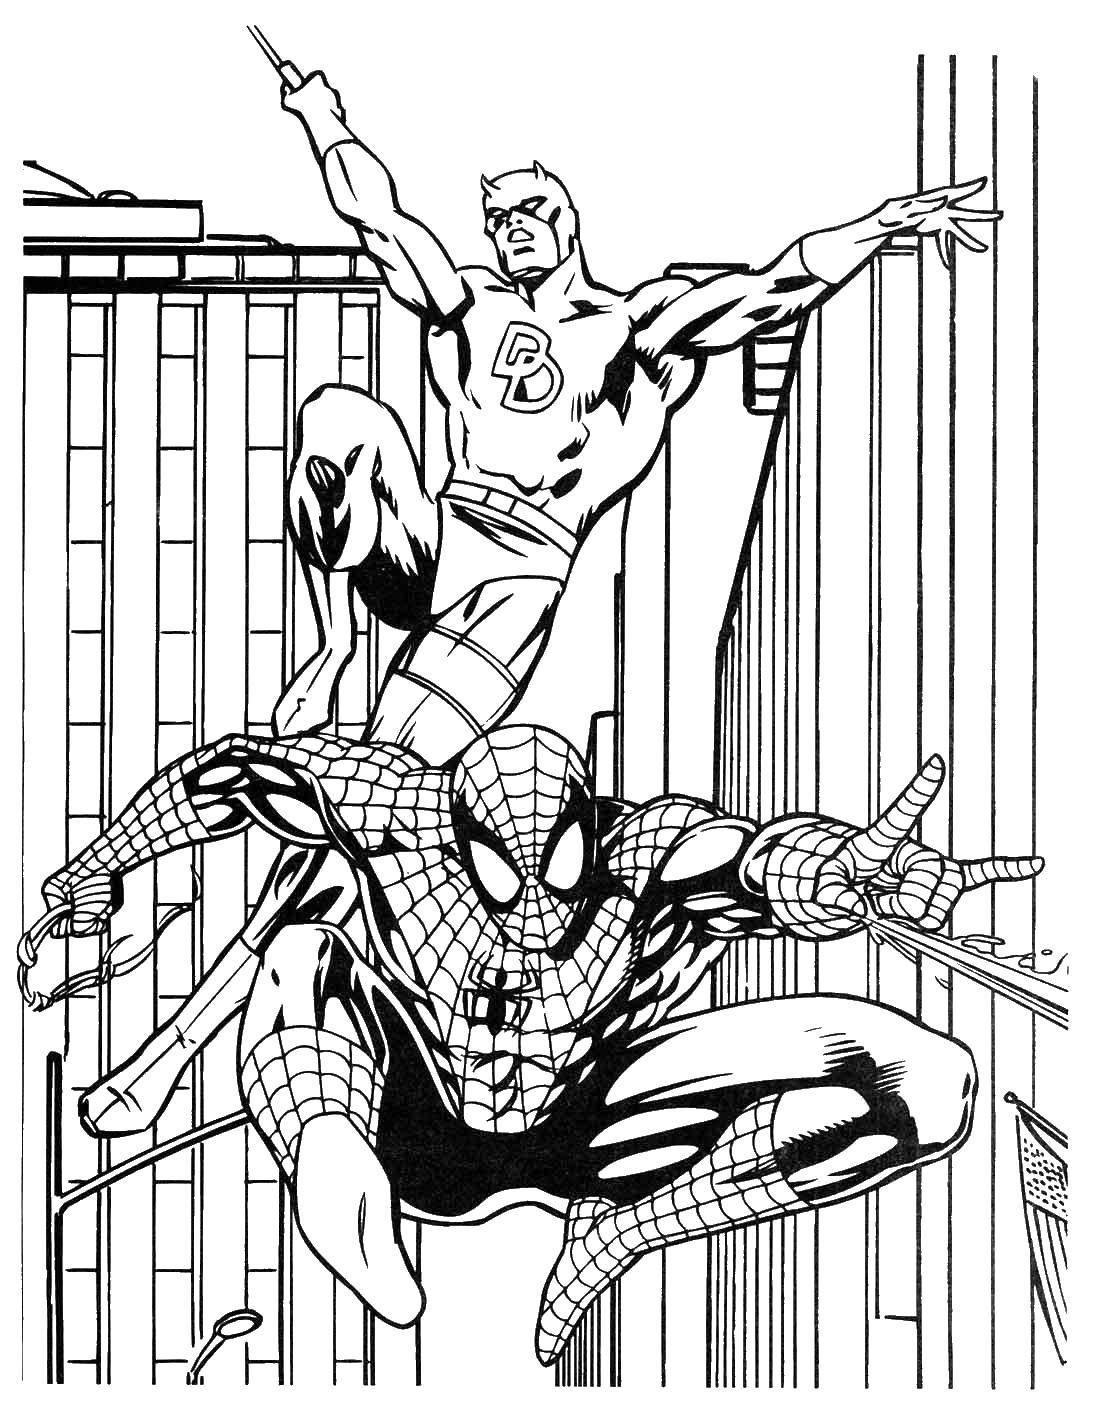 Coloring Spider-man. Category superheroes. Tags:  spider man, flying.